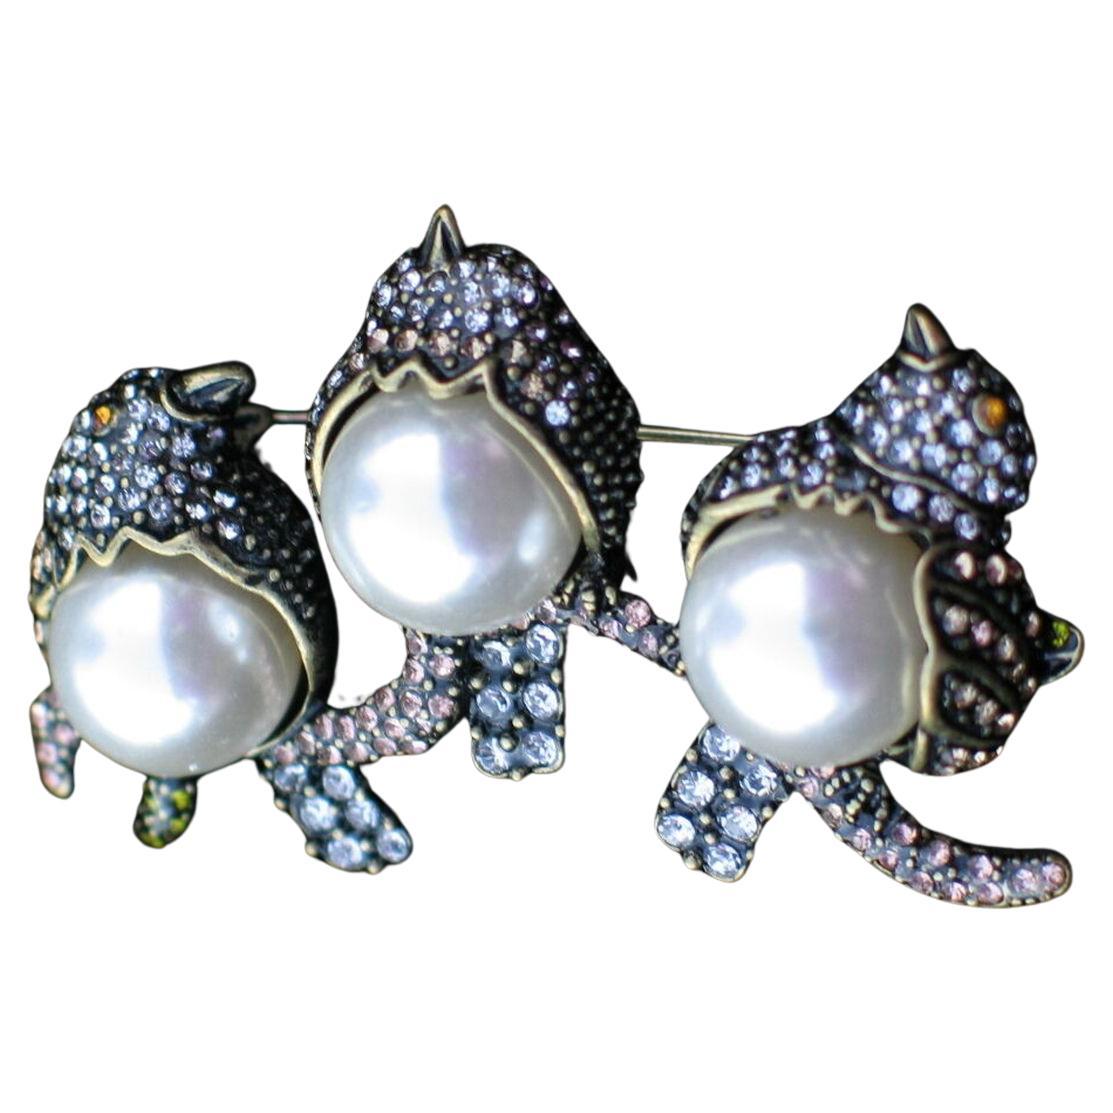 Vintage 3 Bird Chicks Faux Pearl Sparkling Crystal Golden Brooch Pin For Sale